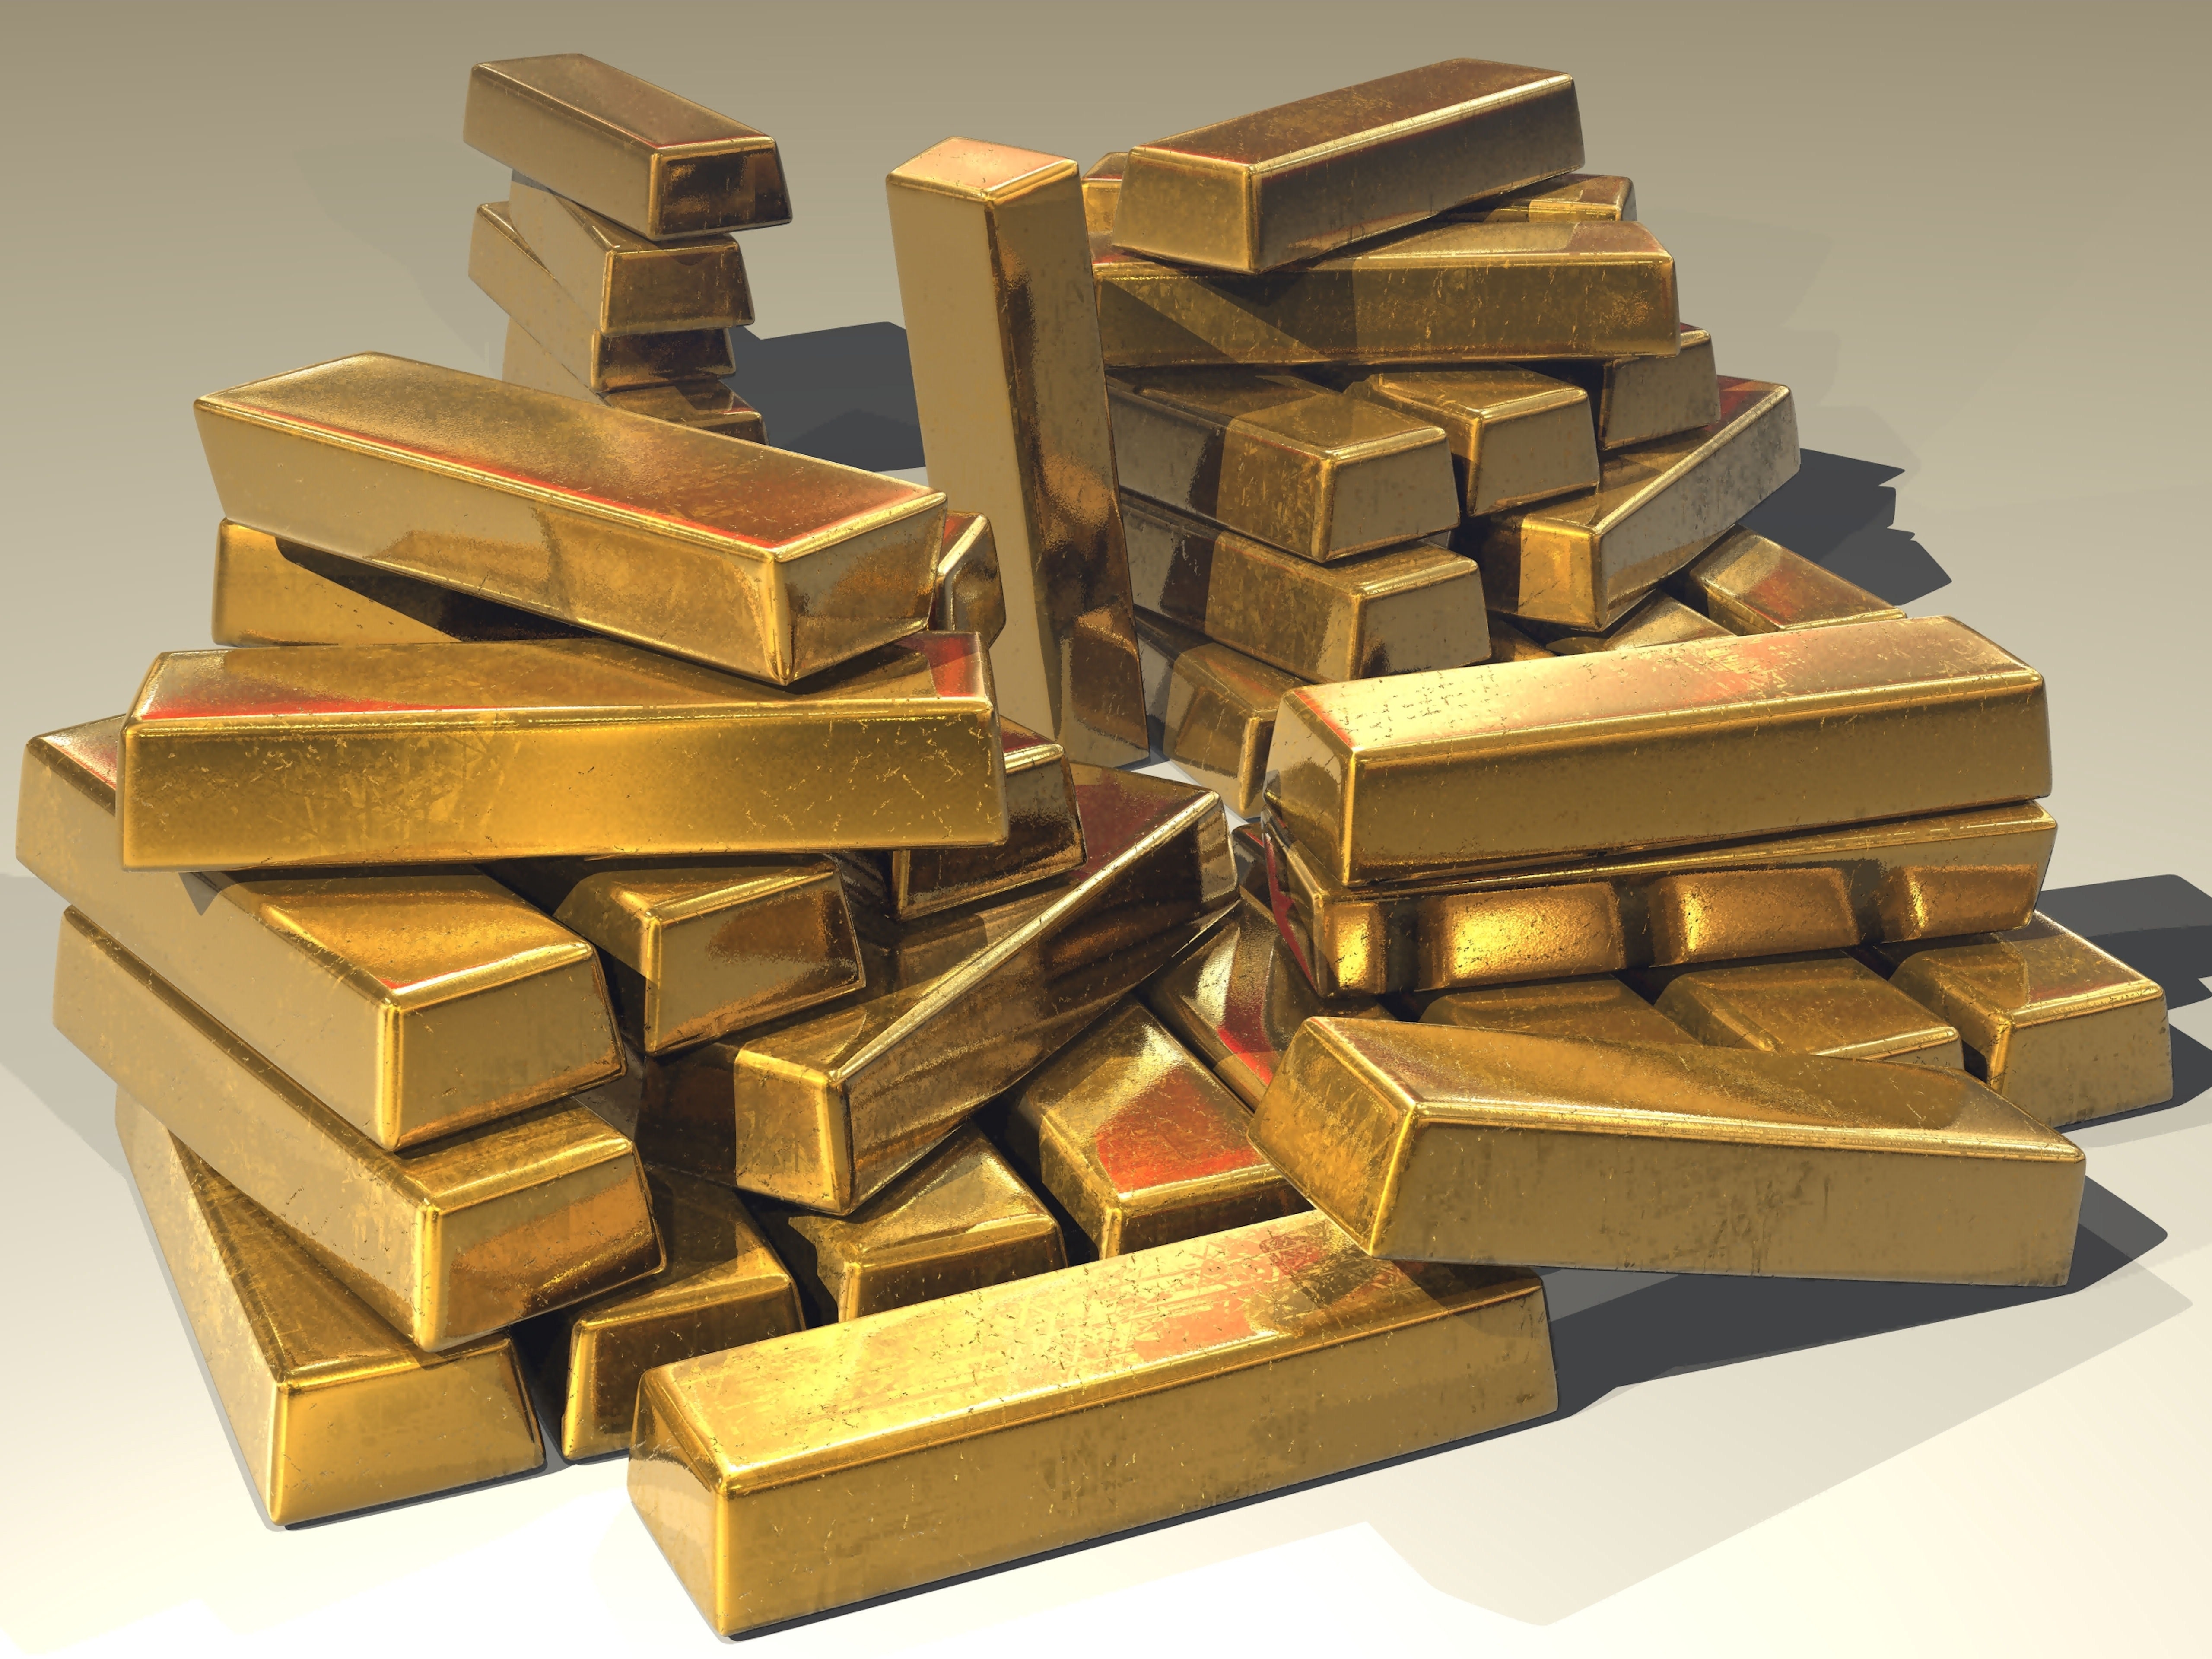 Can I rollover an existing retirement account into a self-directed gold IRA?